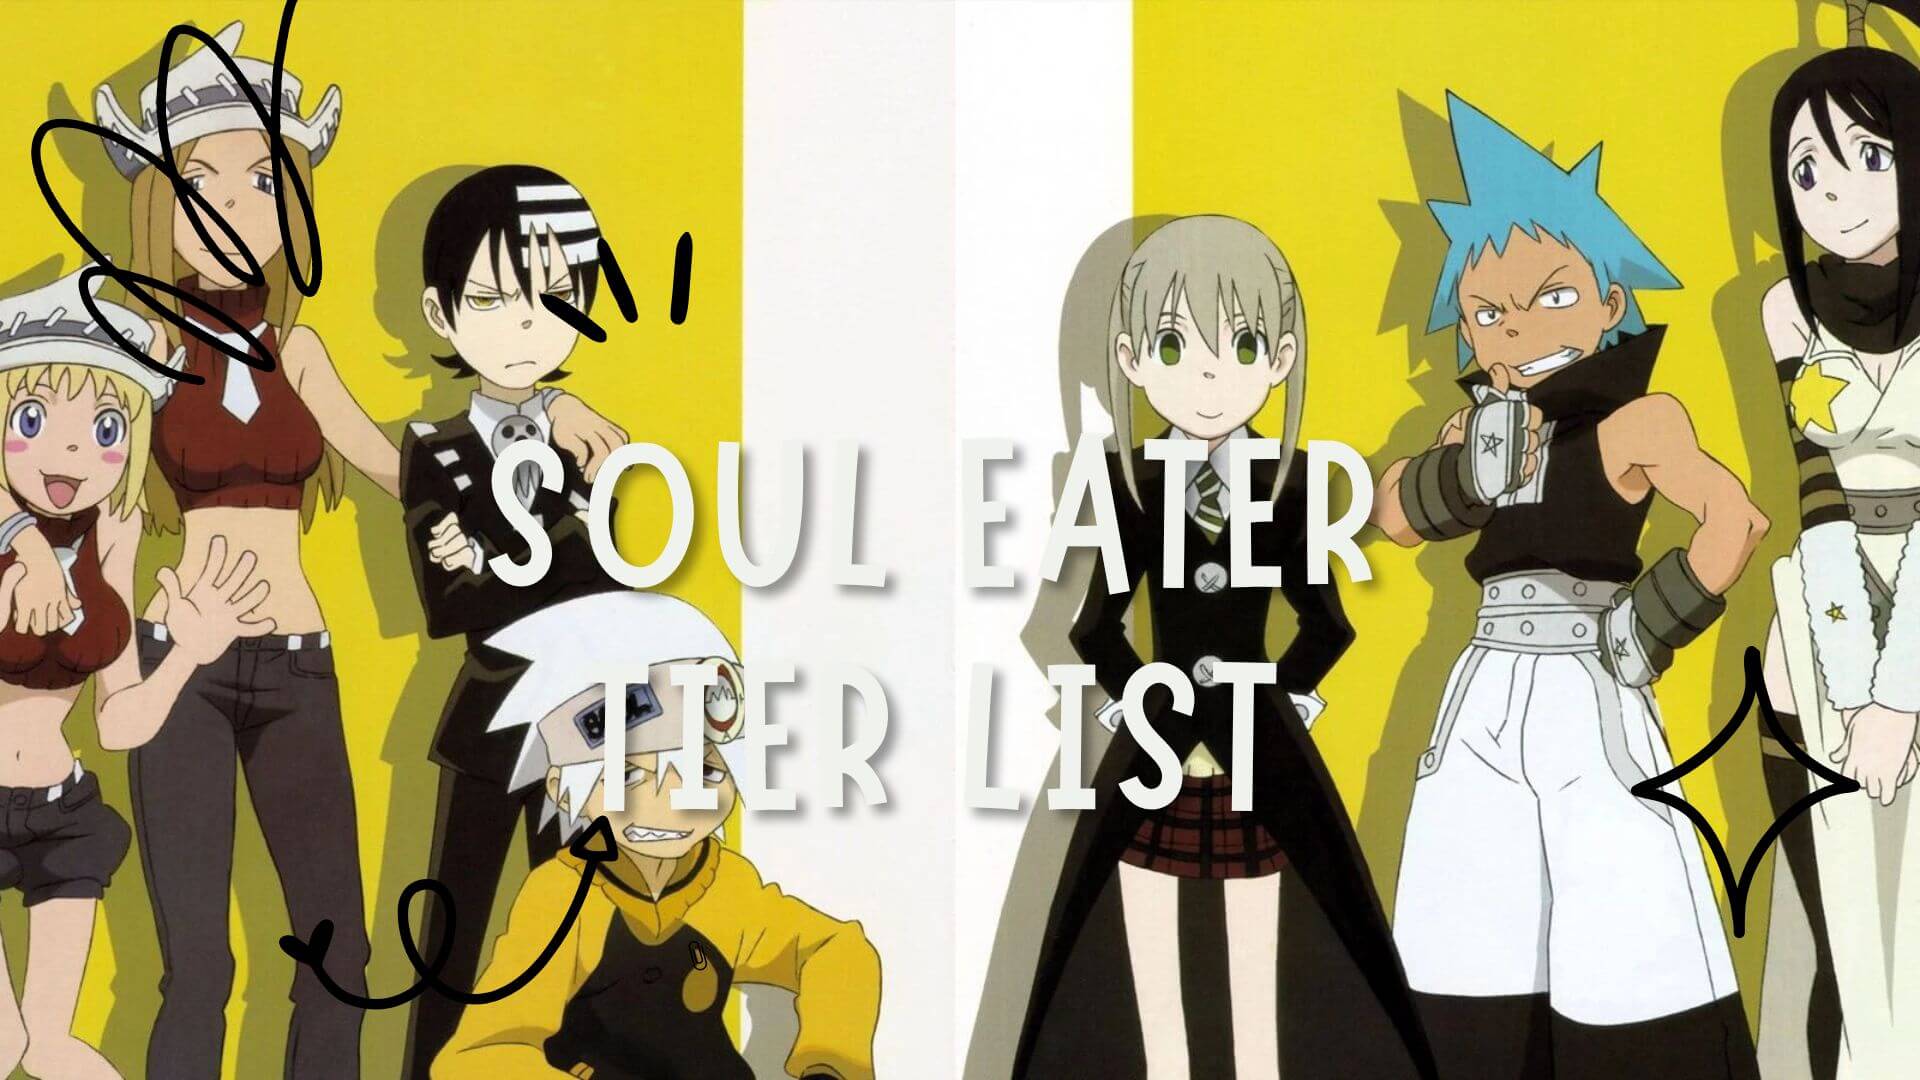 SOUL RESONANCE!! soul resonance weapons from the anime and manga, soul eater.  : r/JessetcSubmissions